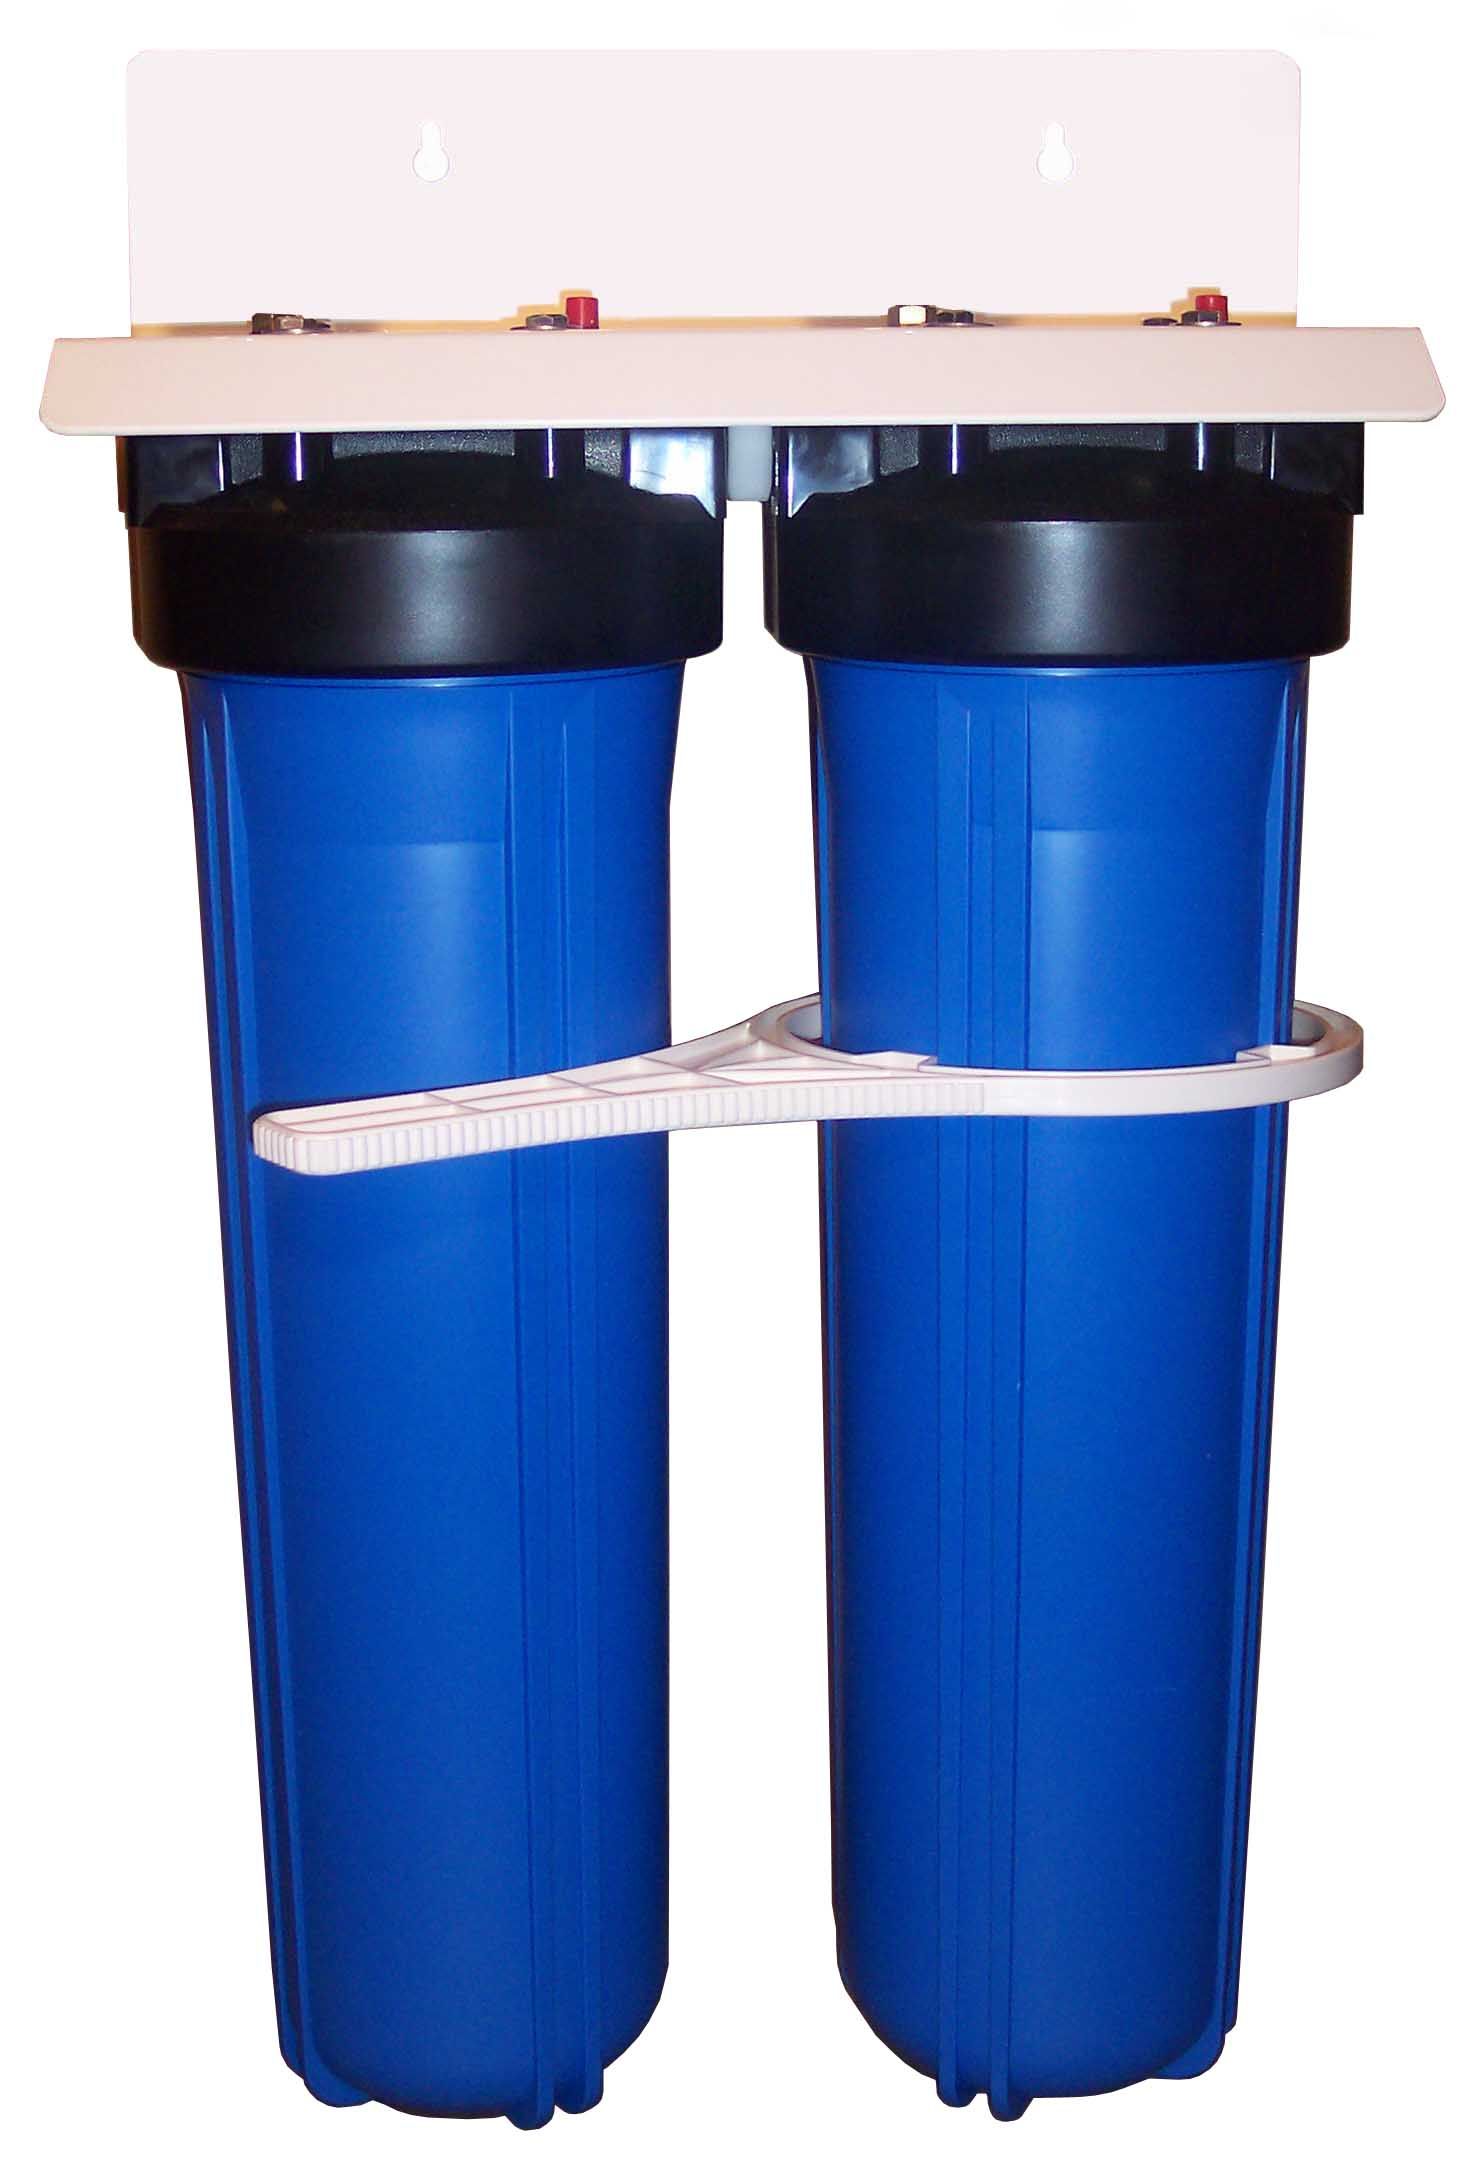 Our Whole House Water Filter designed with oversize filters, housings